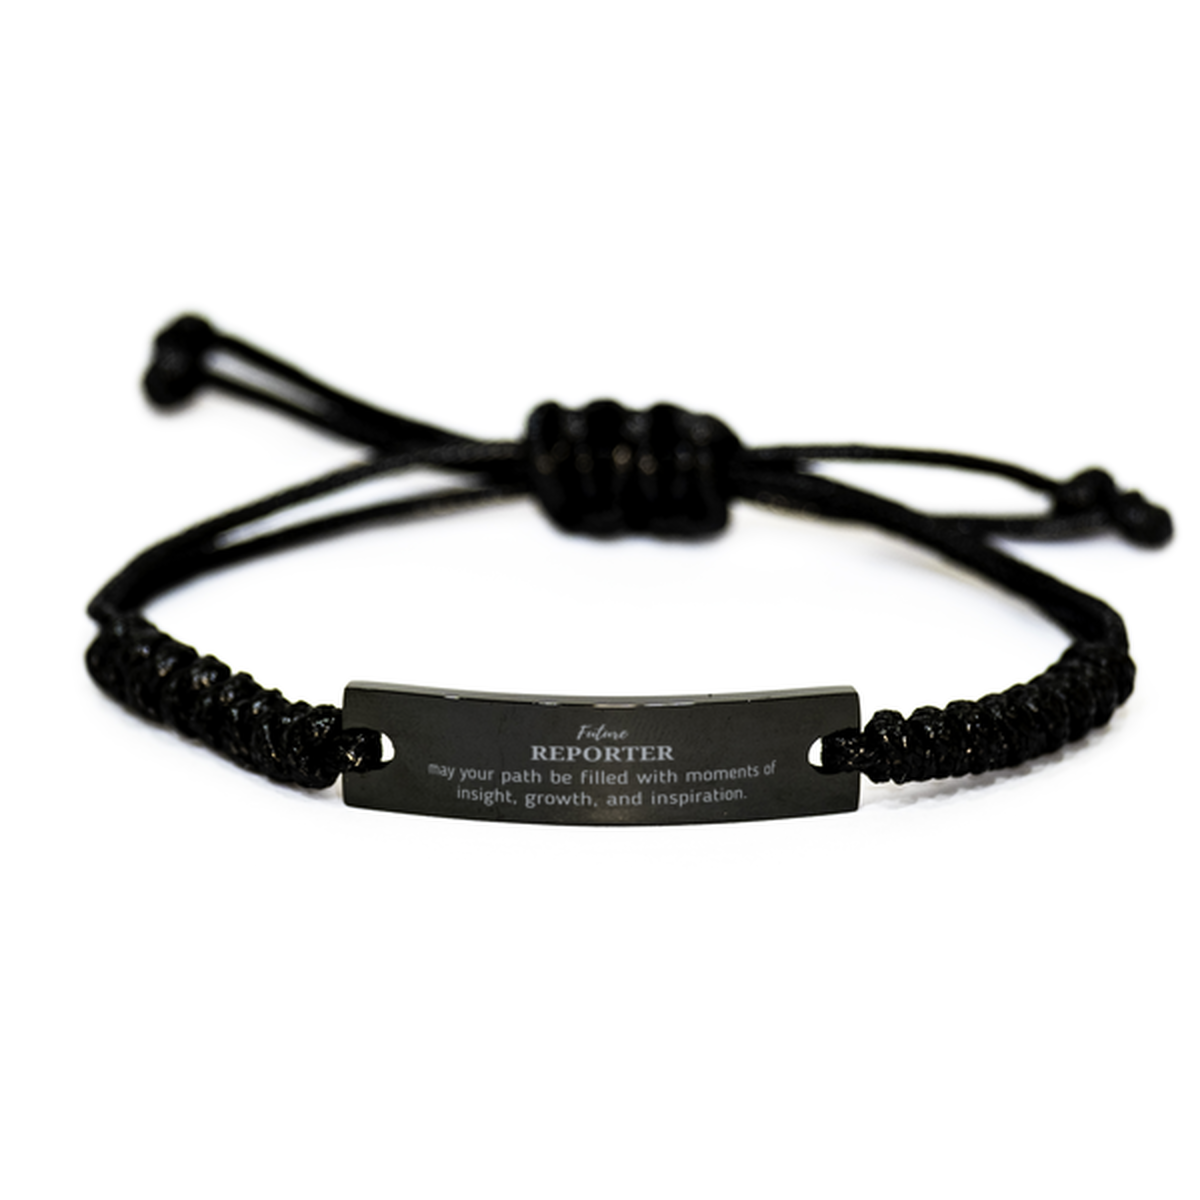 Future Reporter Gifts, May your path be filled with moments of insight, Graduation Gifts for New Reporter, Christmas Unique Black Rope Bracelet For Men, Women, Friends